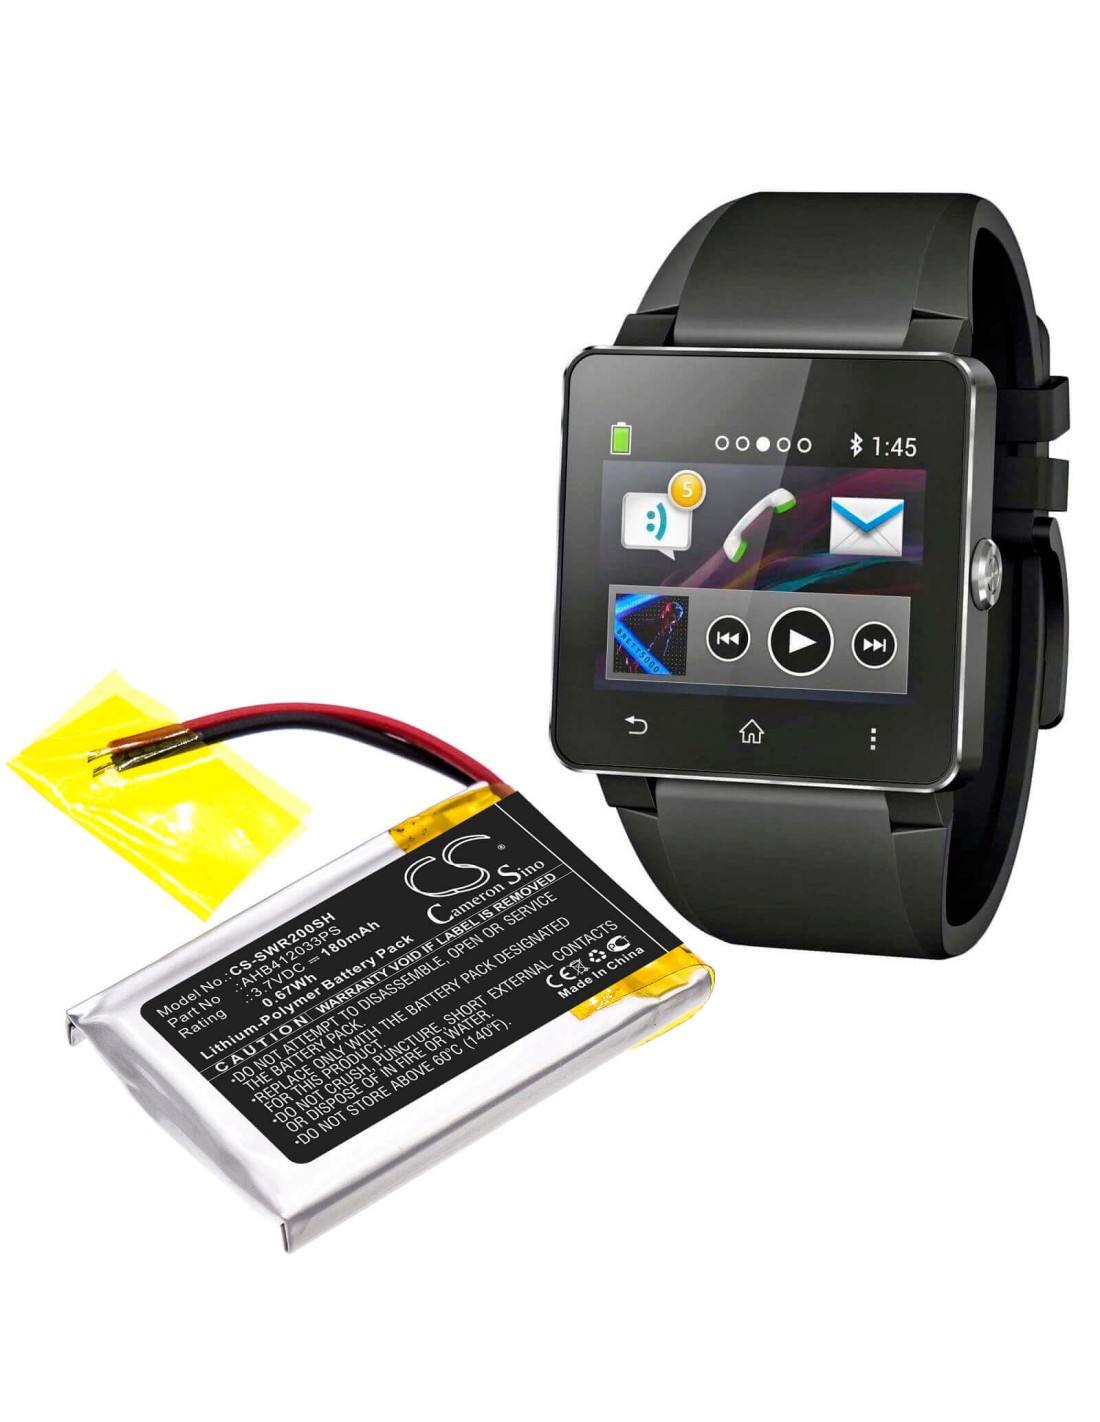 new size Battery 400mah Smart watch battery for Asus Zenwatch 2